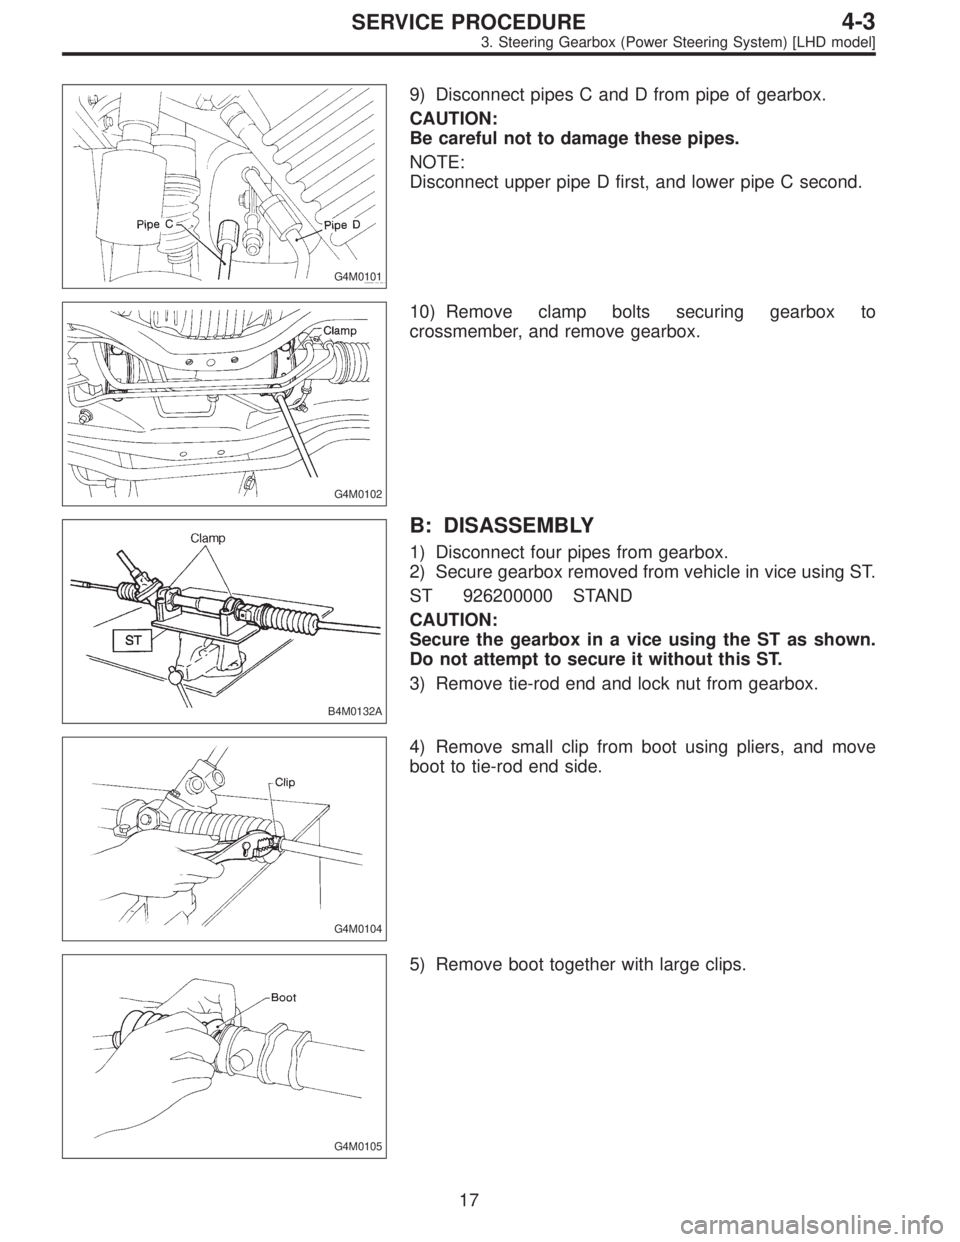 SUBARU LEGACY 1995  Service Repair Manual G4M0101
9) Disconnect pipes C and D from pipe of gearbox.
CAUTION:
Be careful not to damage these pipes.
NOTE:
Disconnect upper pipe D first, and lower pipe C second.
G4M0102
10) Remove clamp bolts se